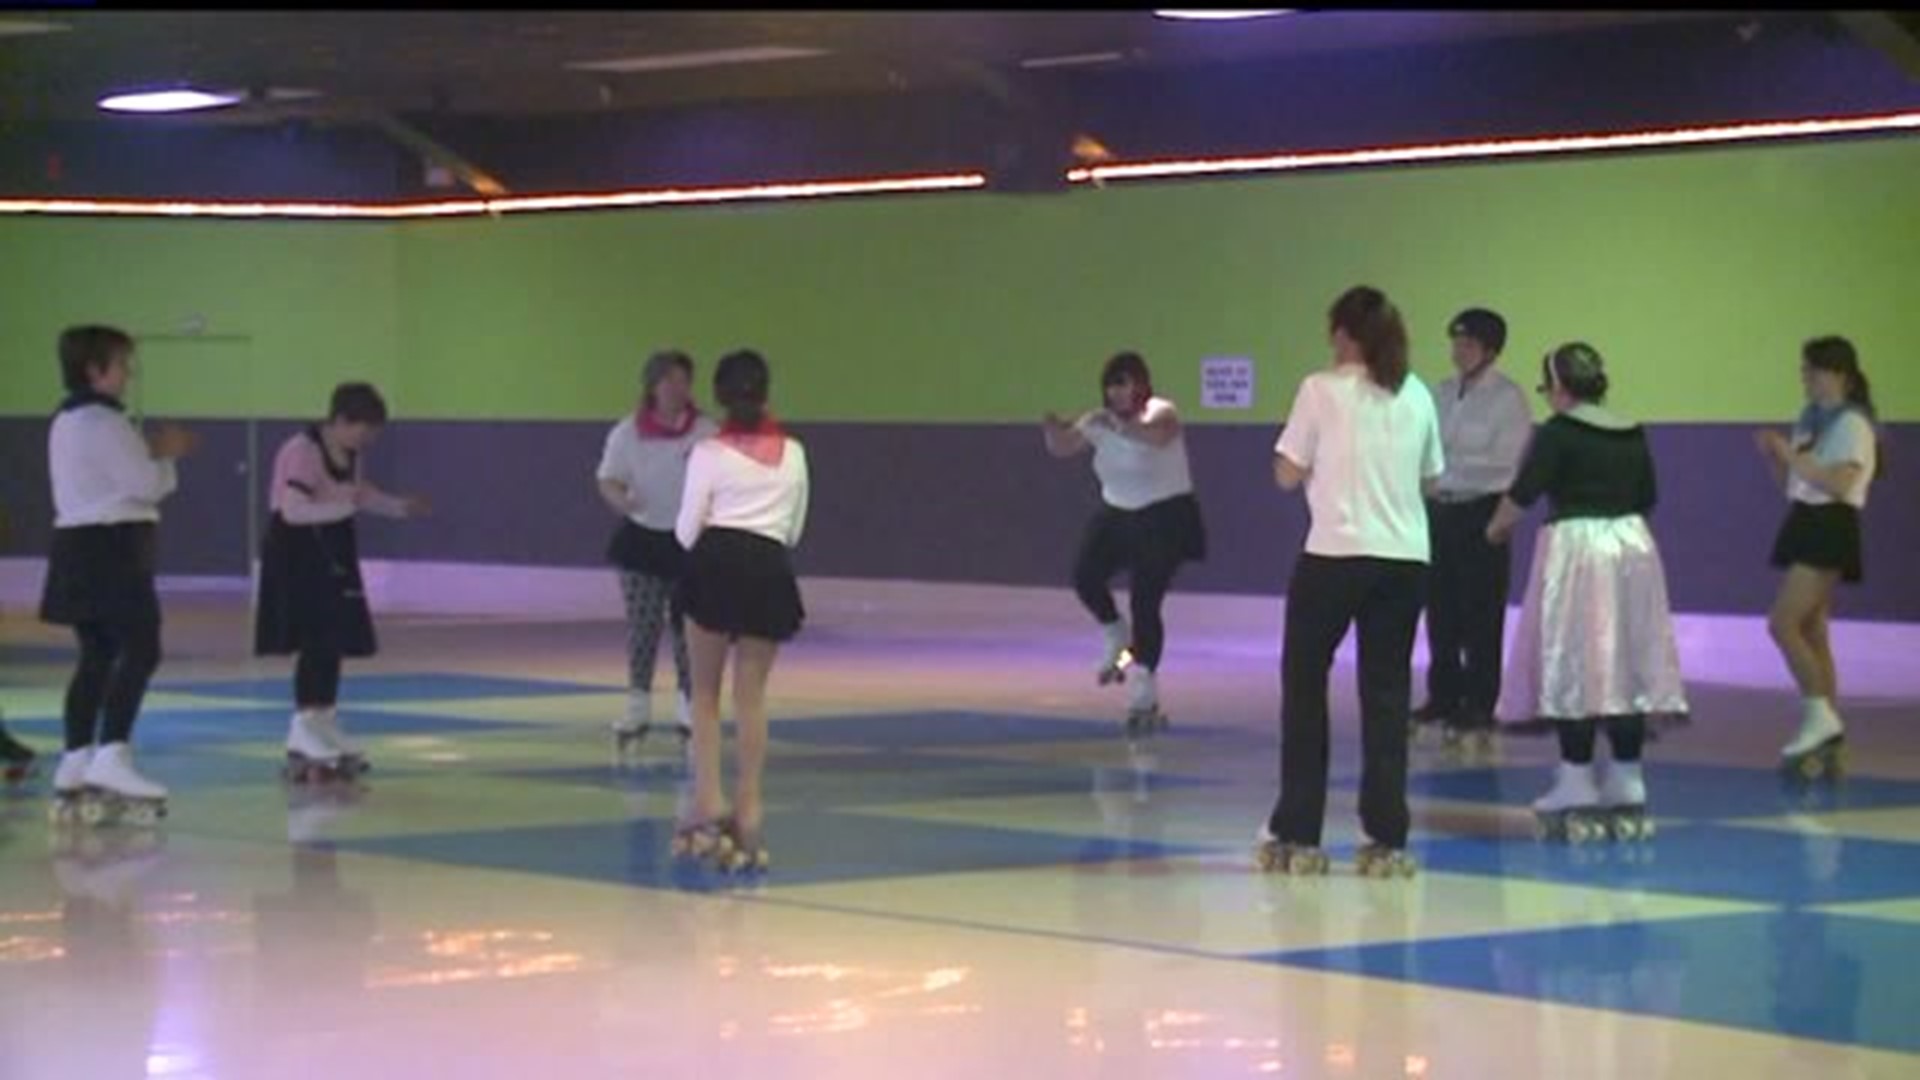 Castle Roller Skating hosts fundraiser for the Special Olympics